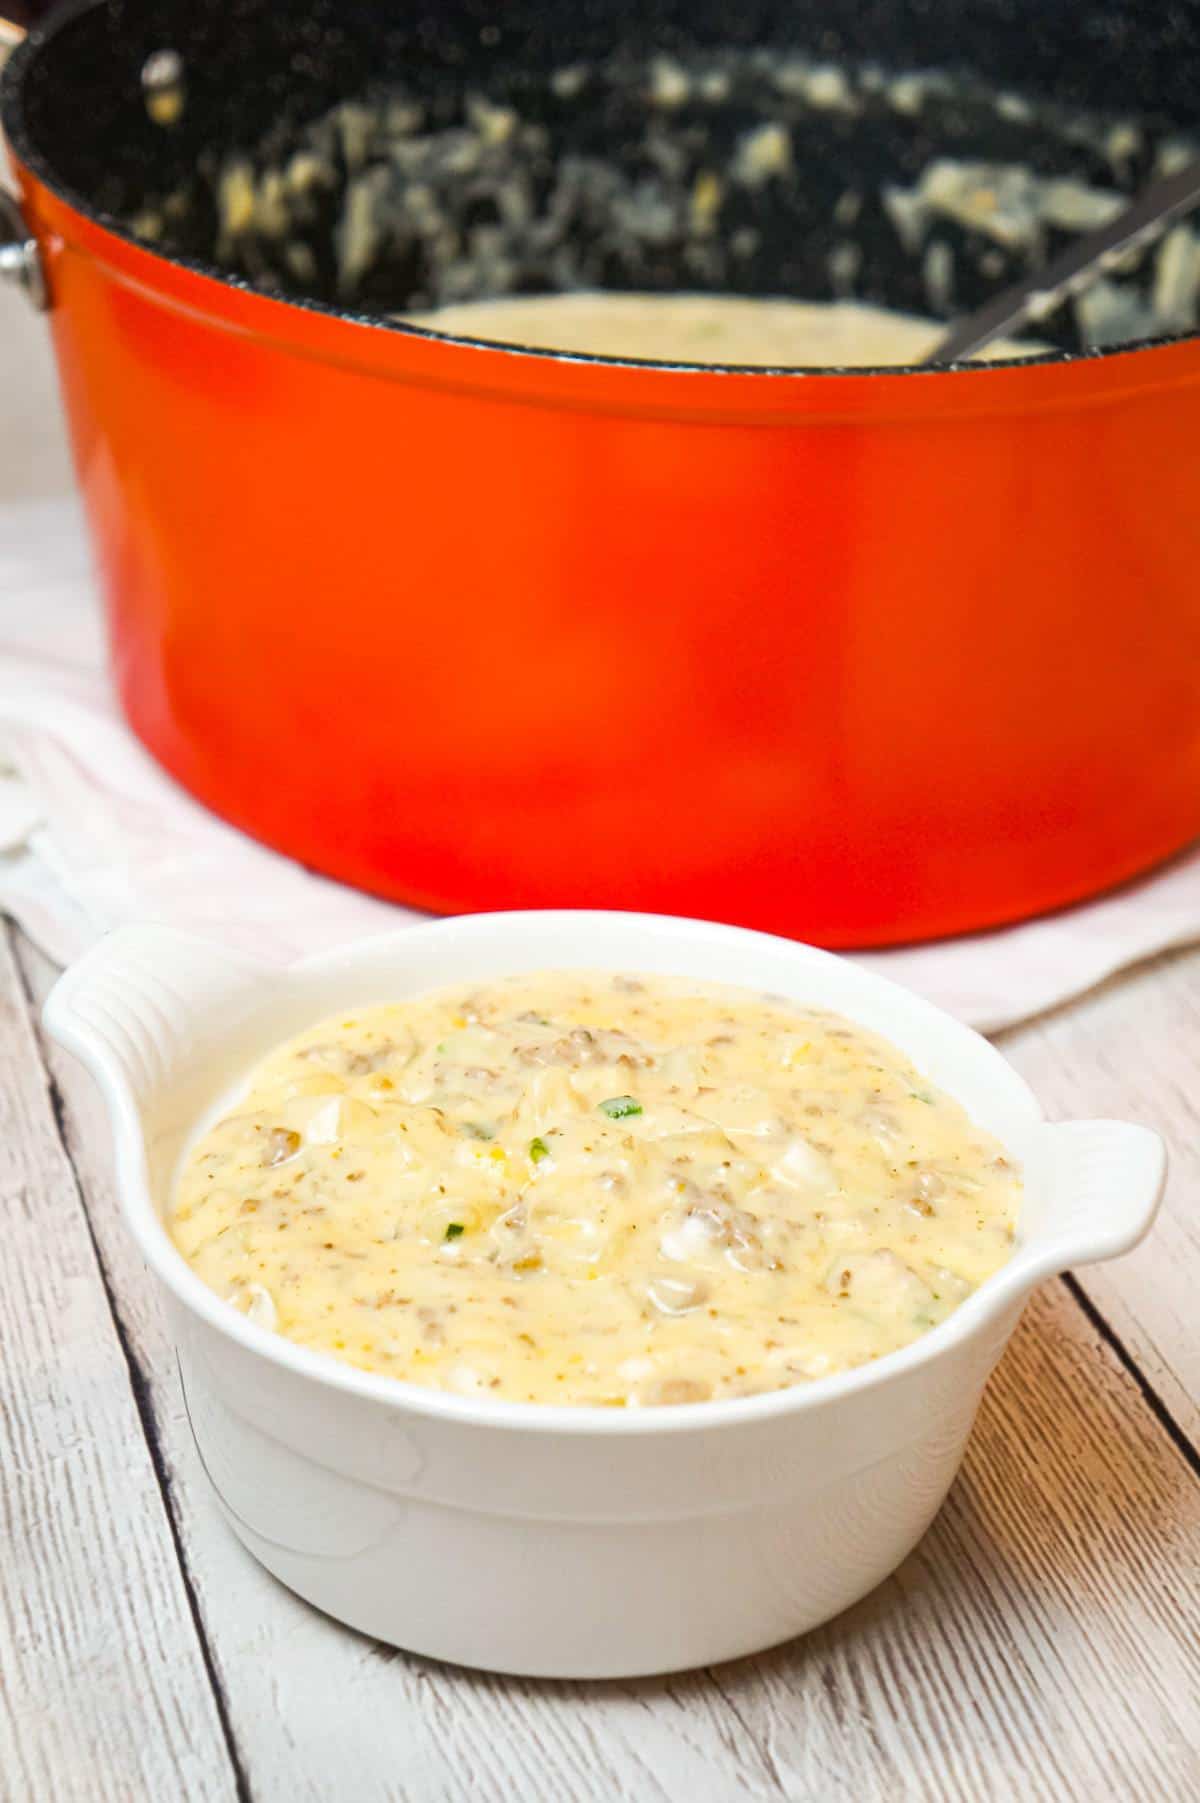 Cheesy Hamburger Potato Soup is a hearty soup recipe loaded with ground beef, diced potatoes, chopped green onions and shredded cheddar cheese.